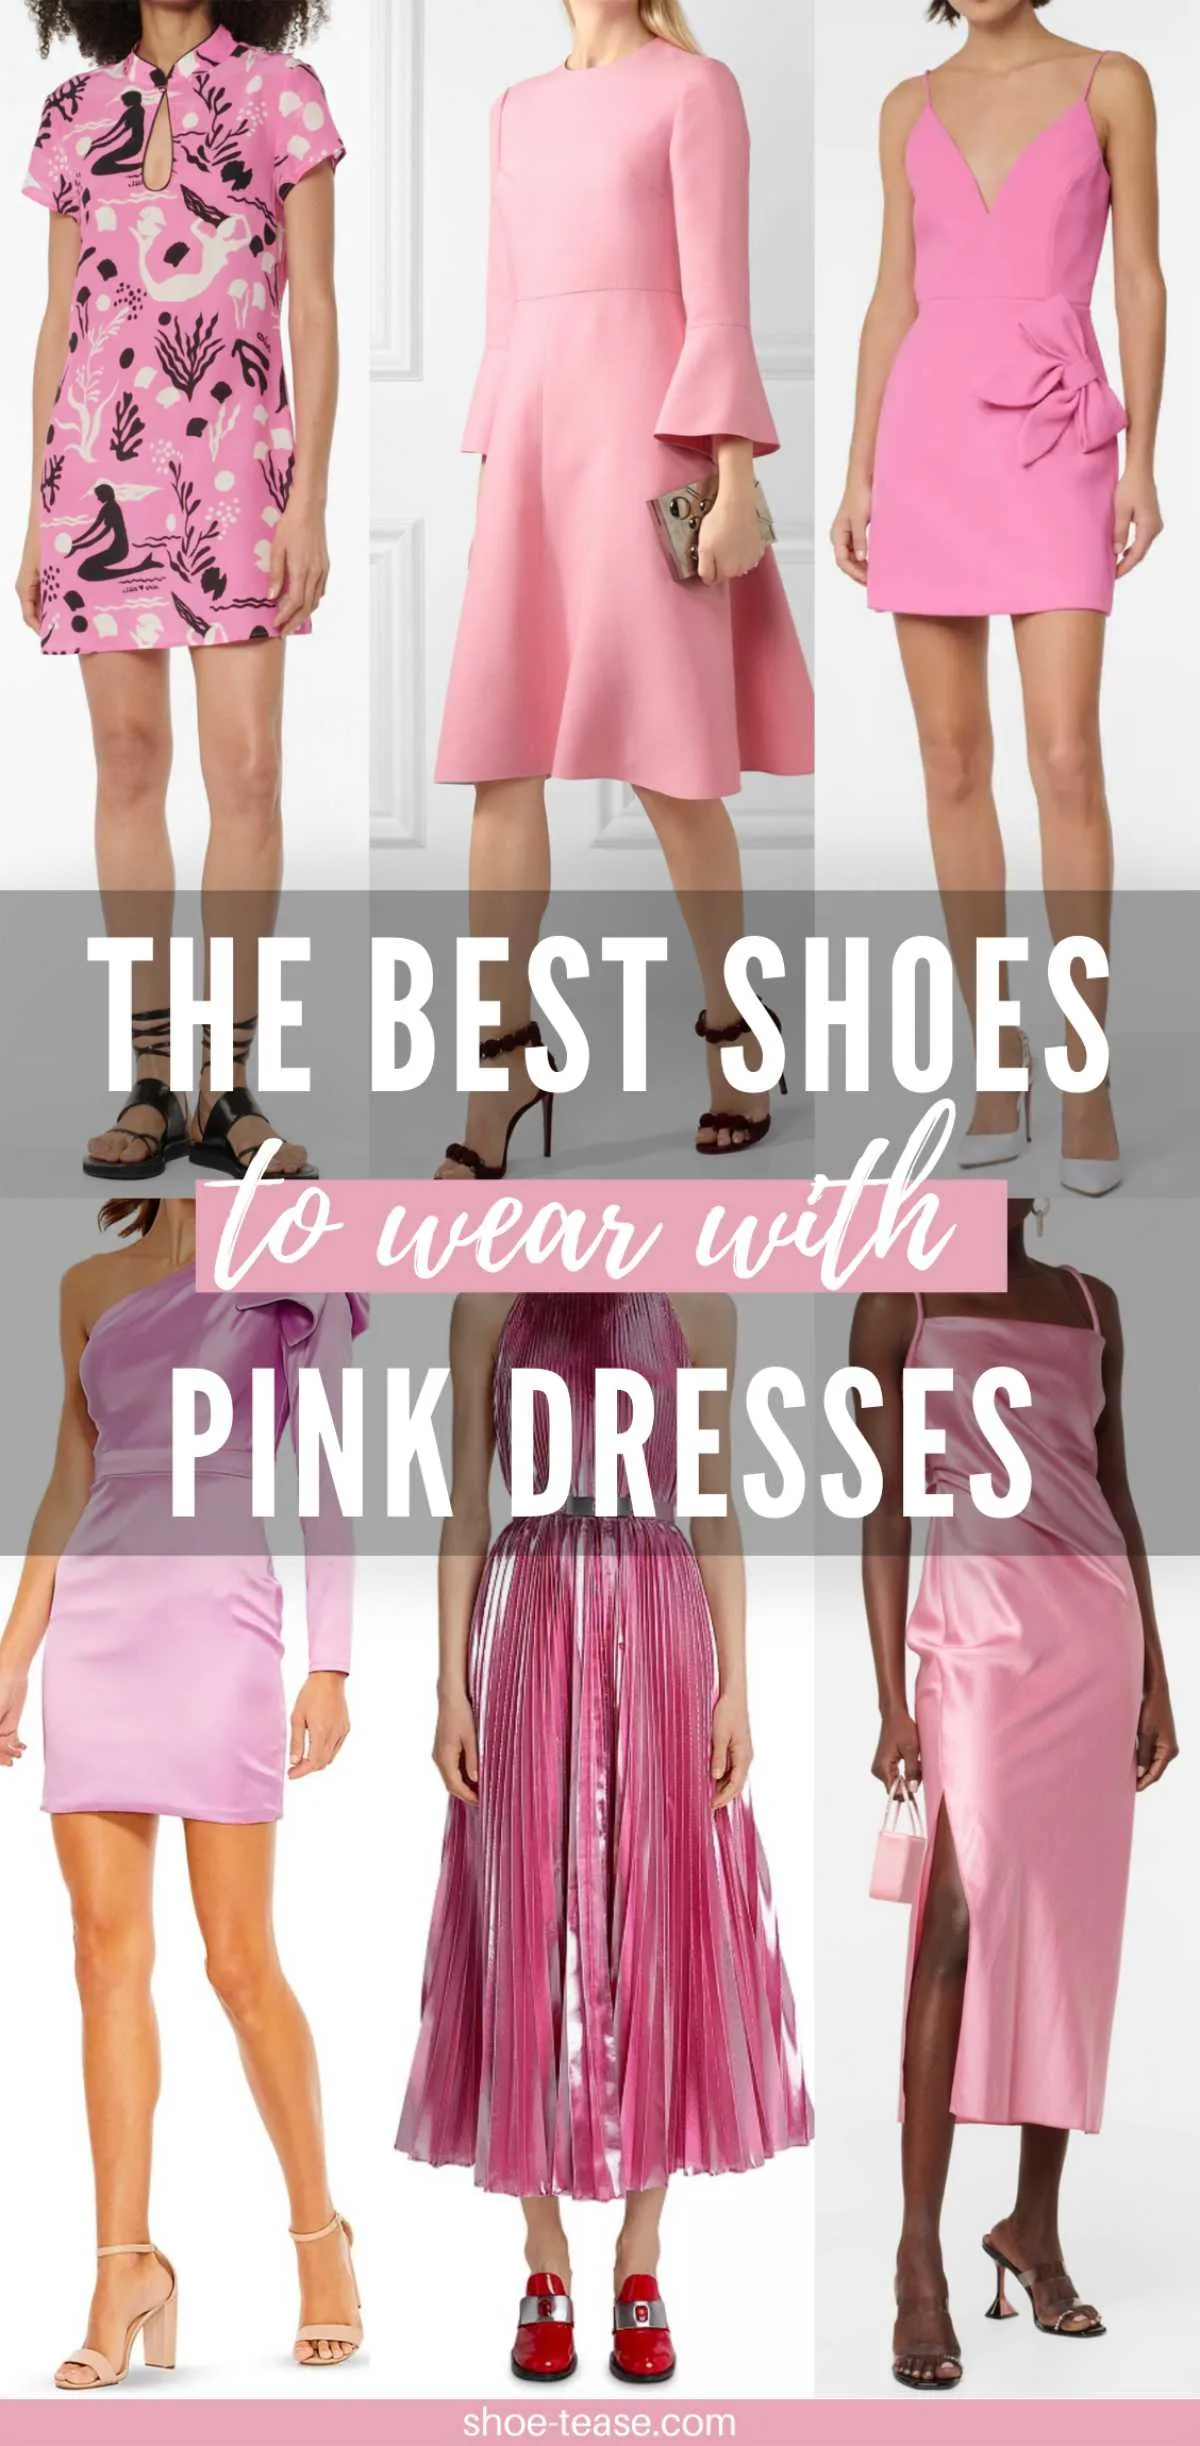 What Color Shoes to Wear with Pink Dress Outfits - 12 Best Colors!